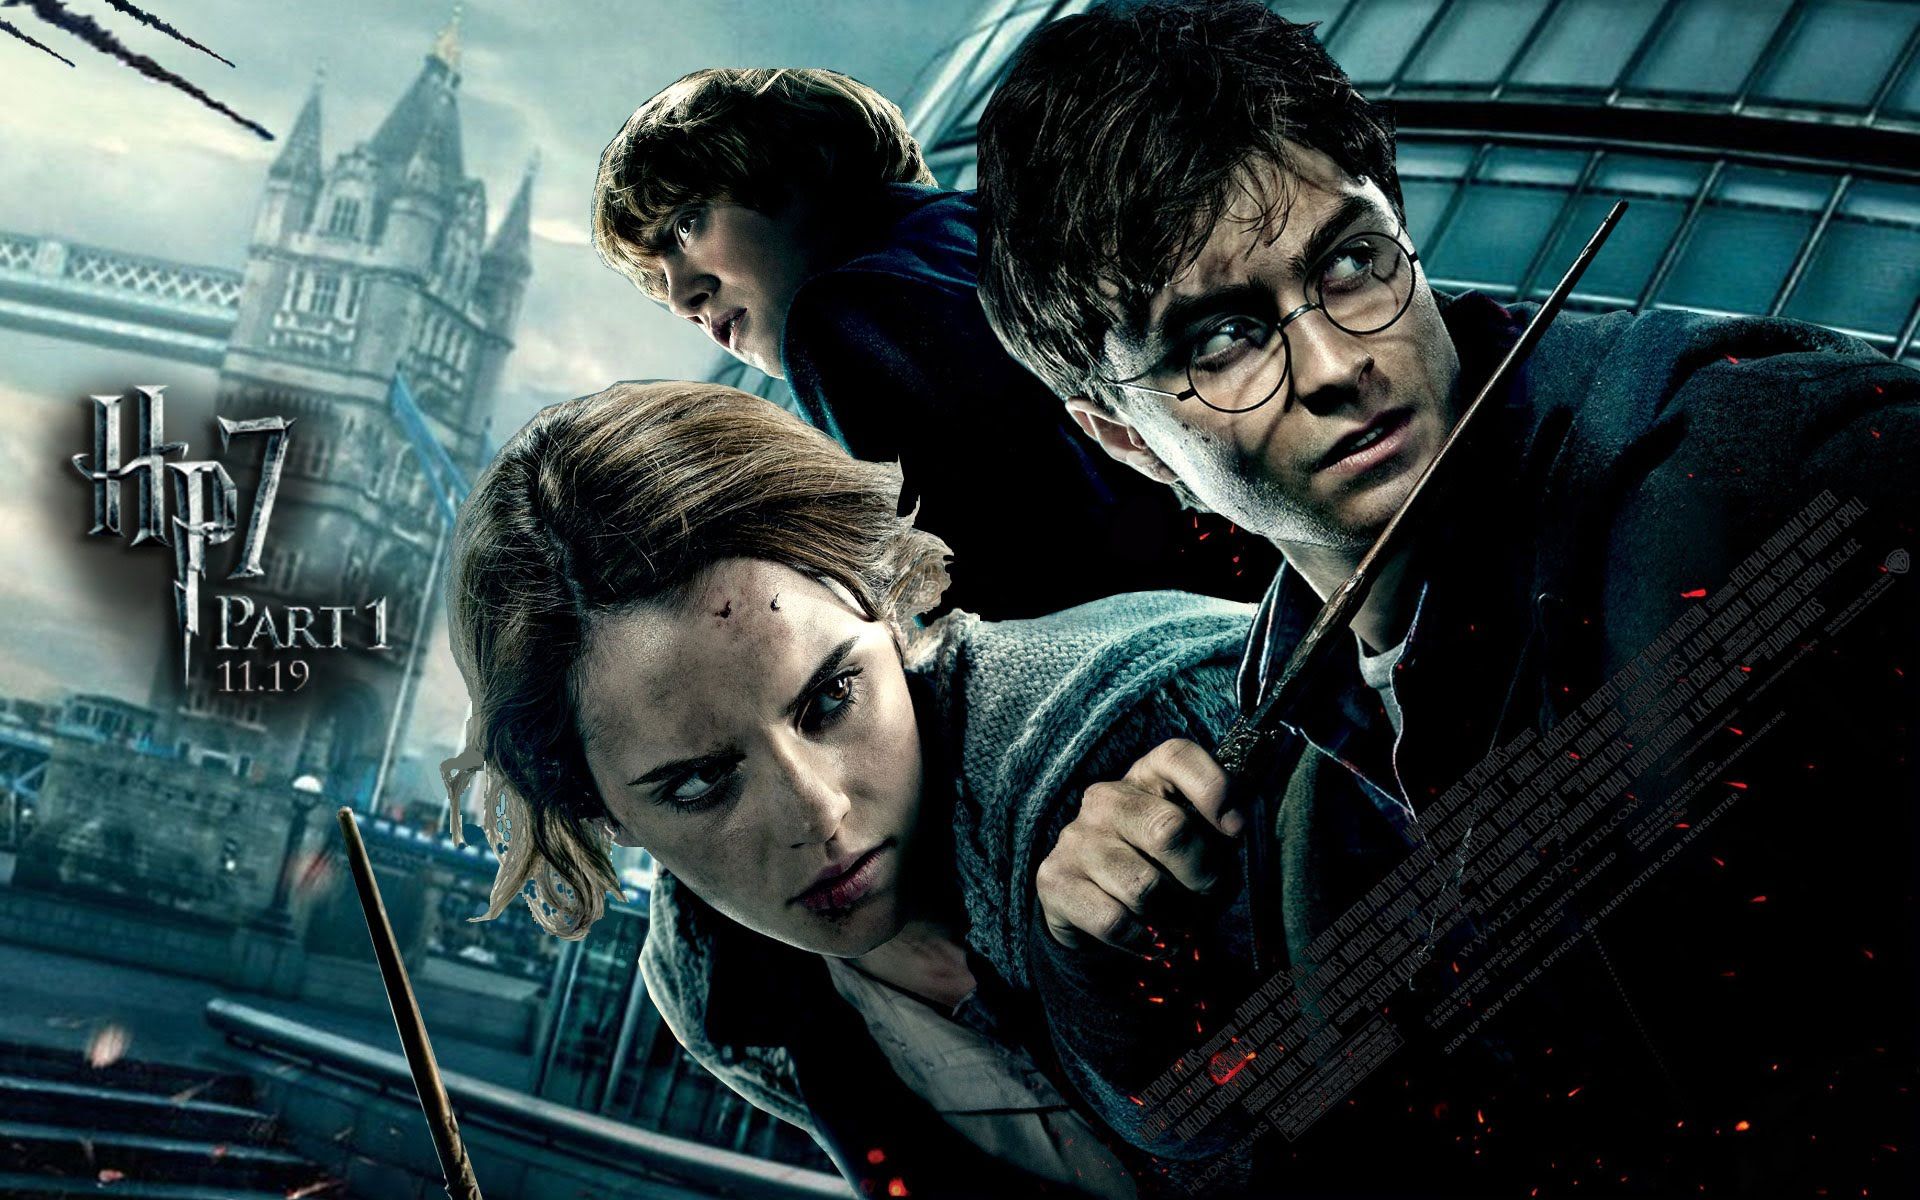 Harry Potter And The Deathly Hallows: Part 1 Wallpapers